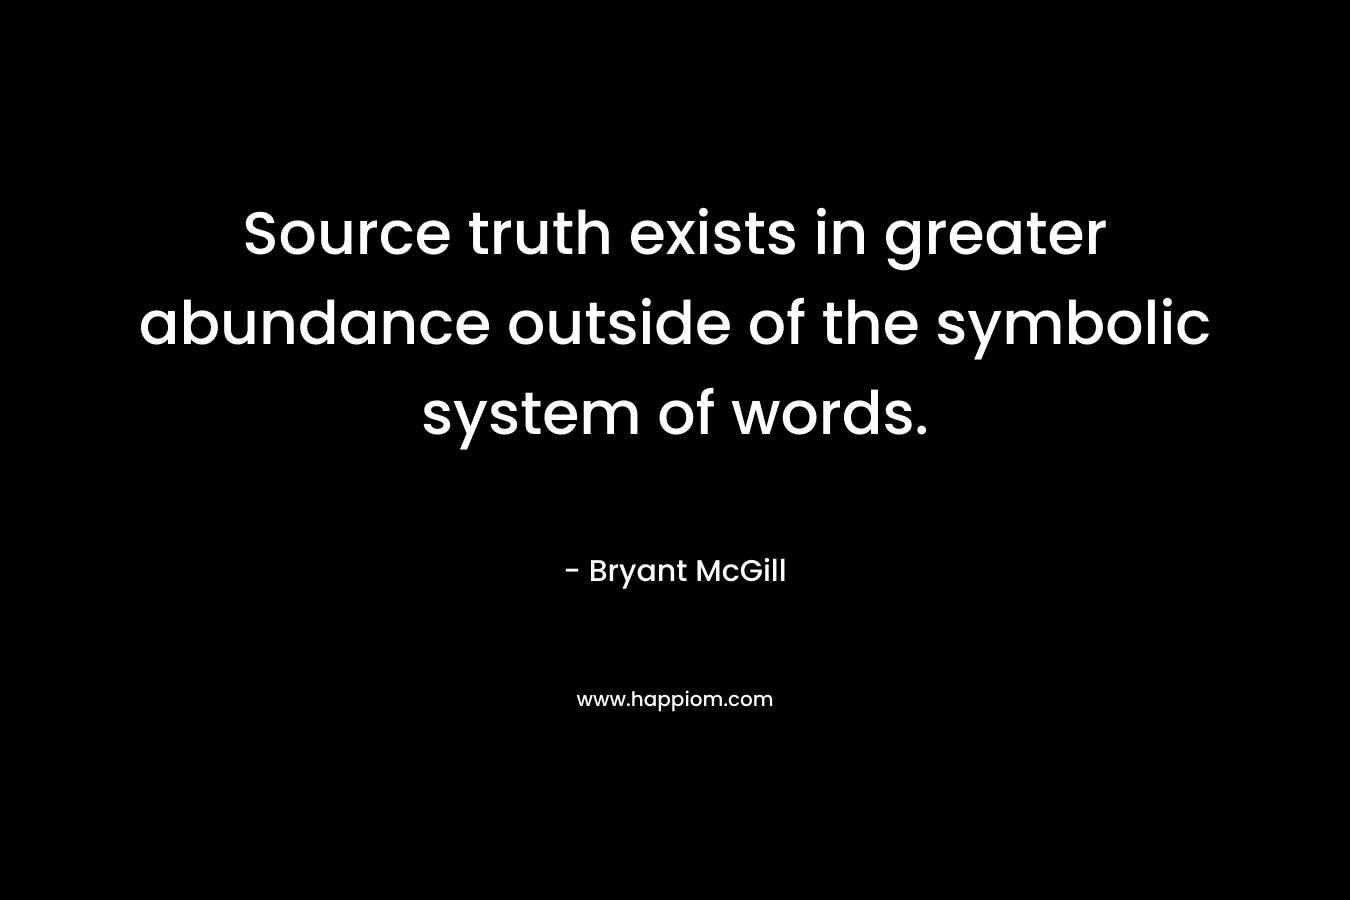 Source truth exists in greater abundance outside of the symbolic system of words.